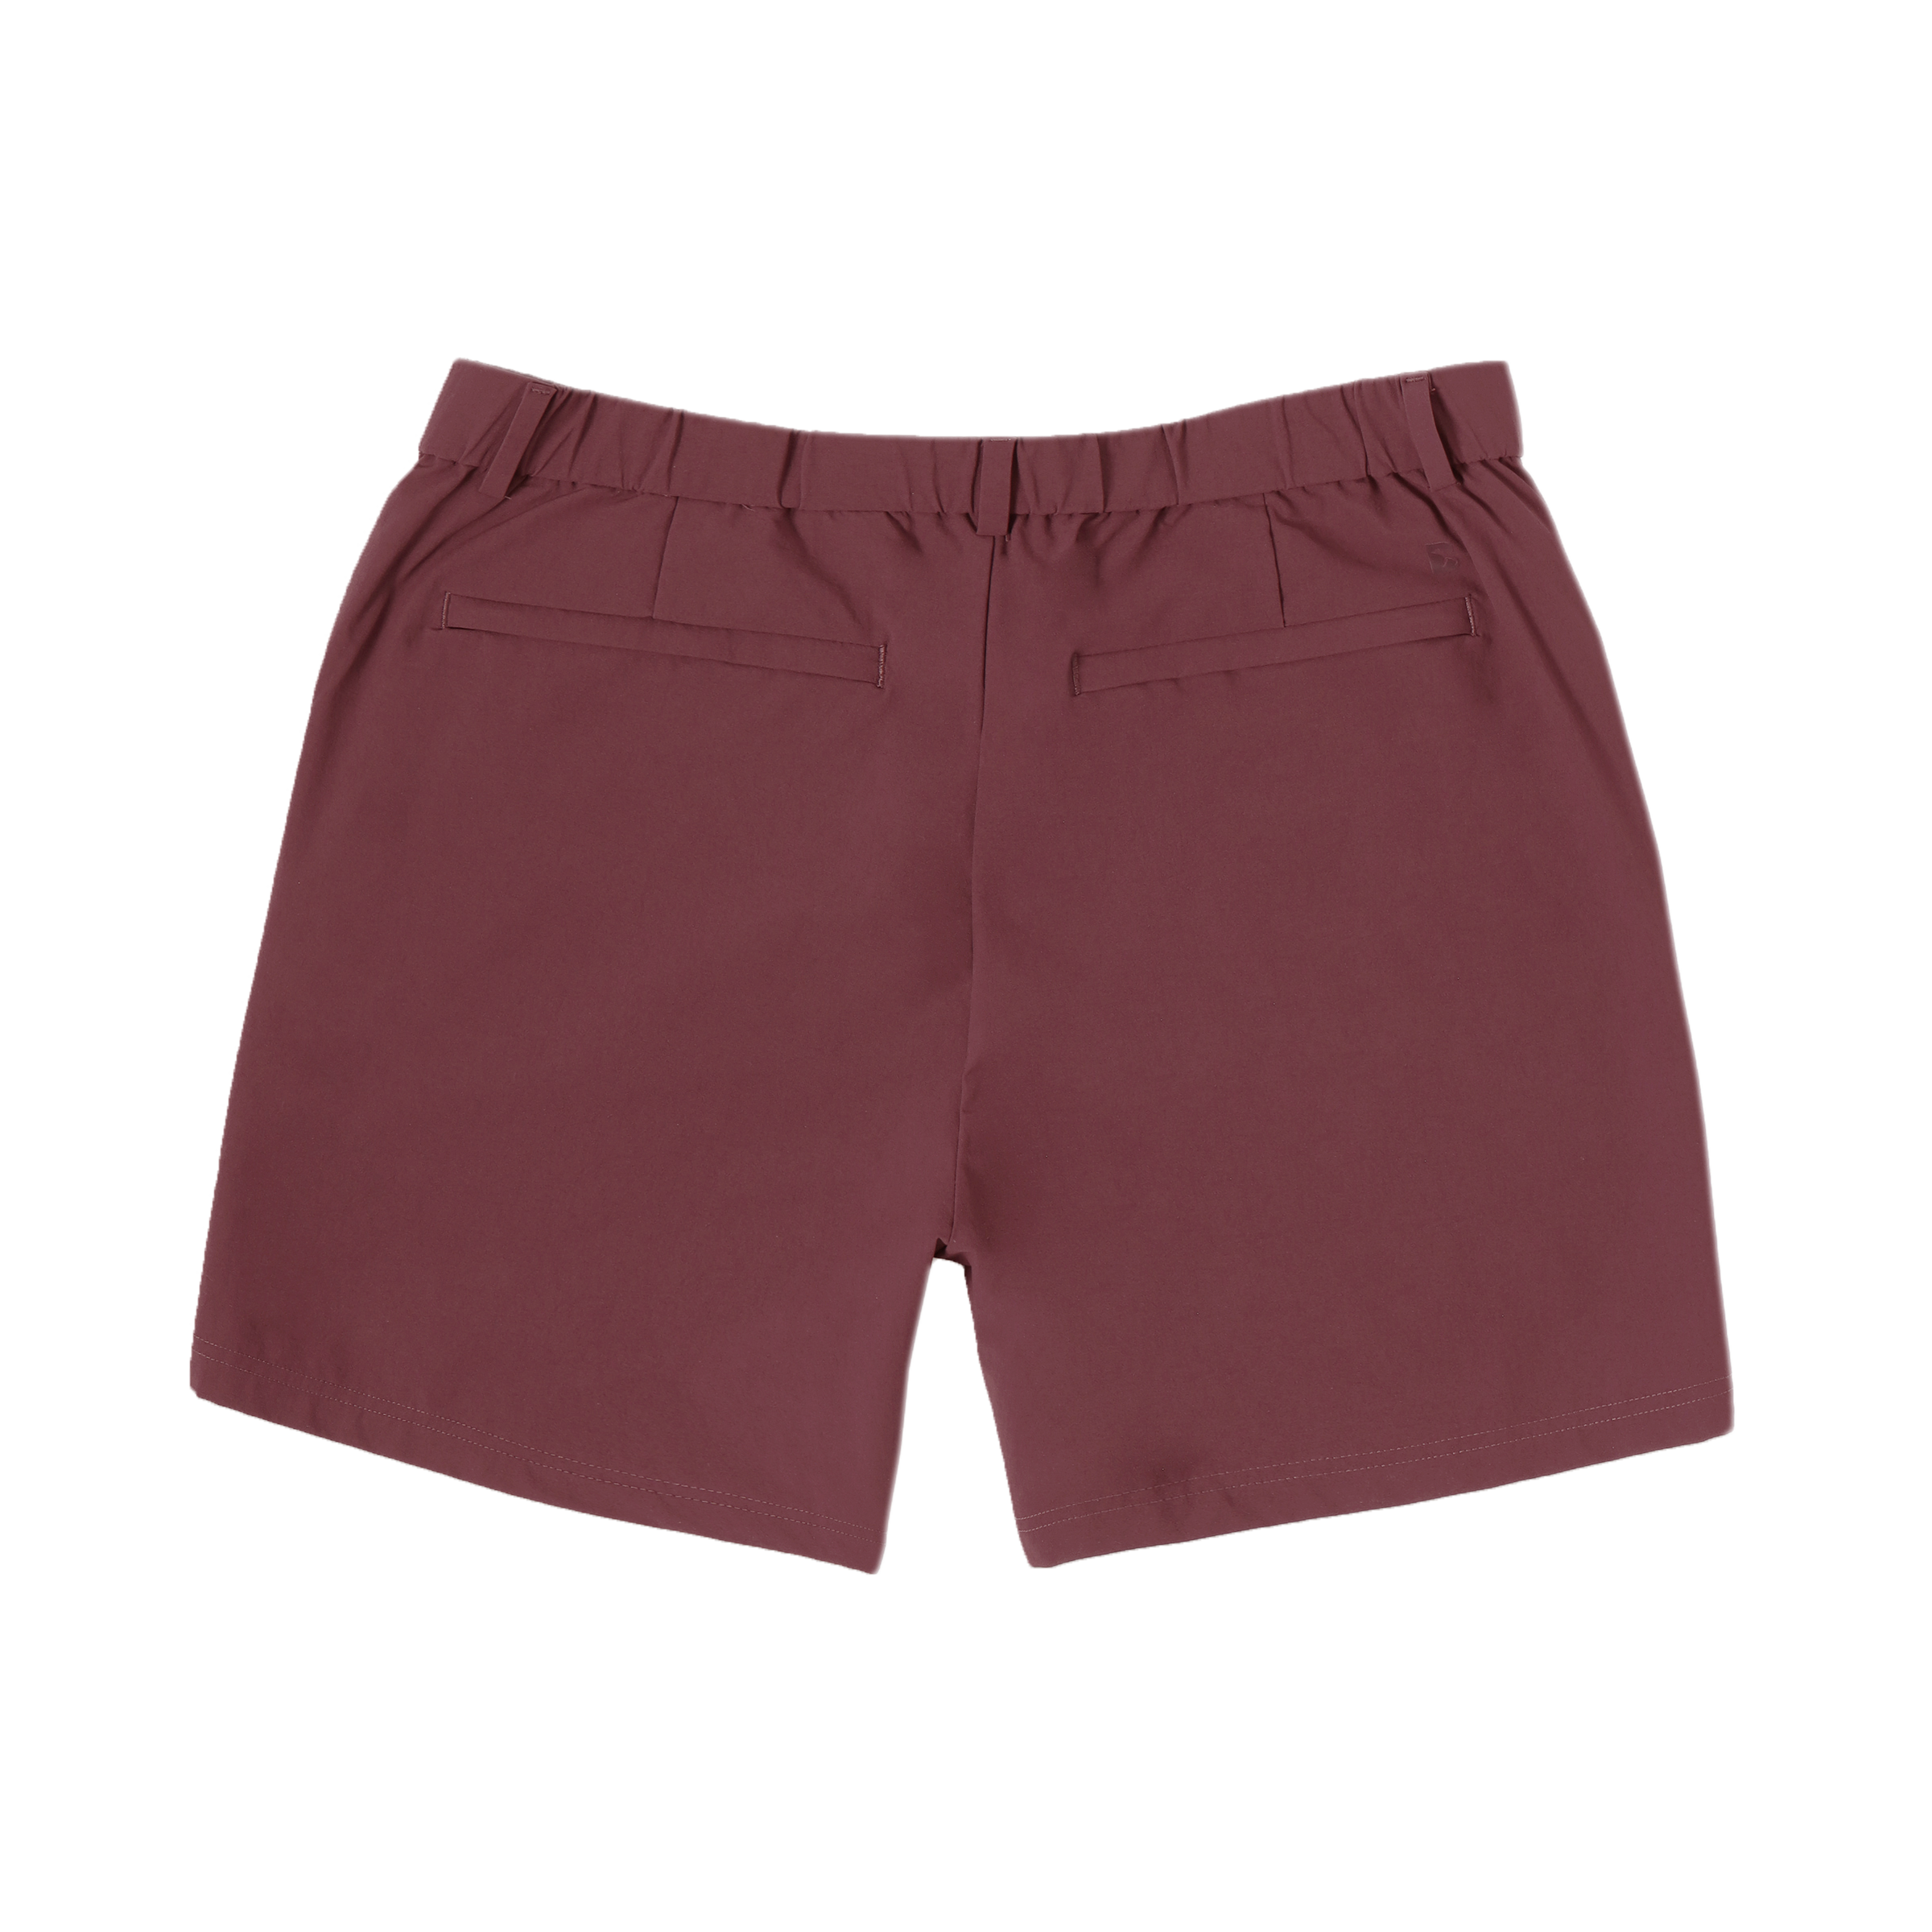 Tour Short 5.5" Wine back with flat elastic waistband, belt loops, and two hidden zipper back pockets